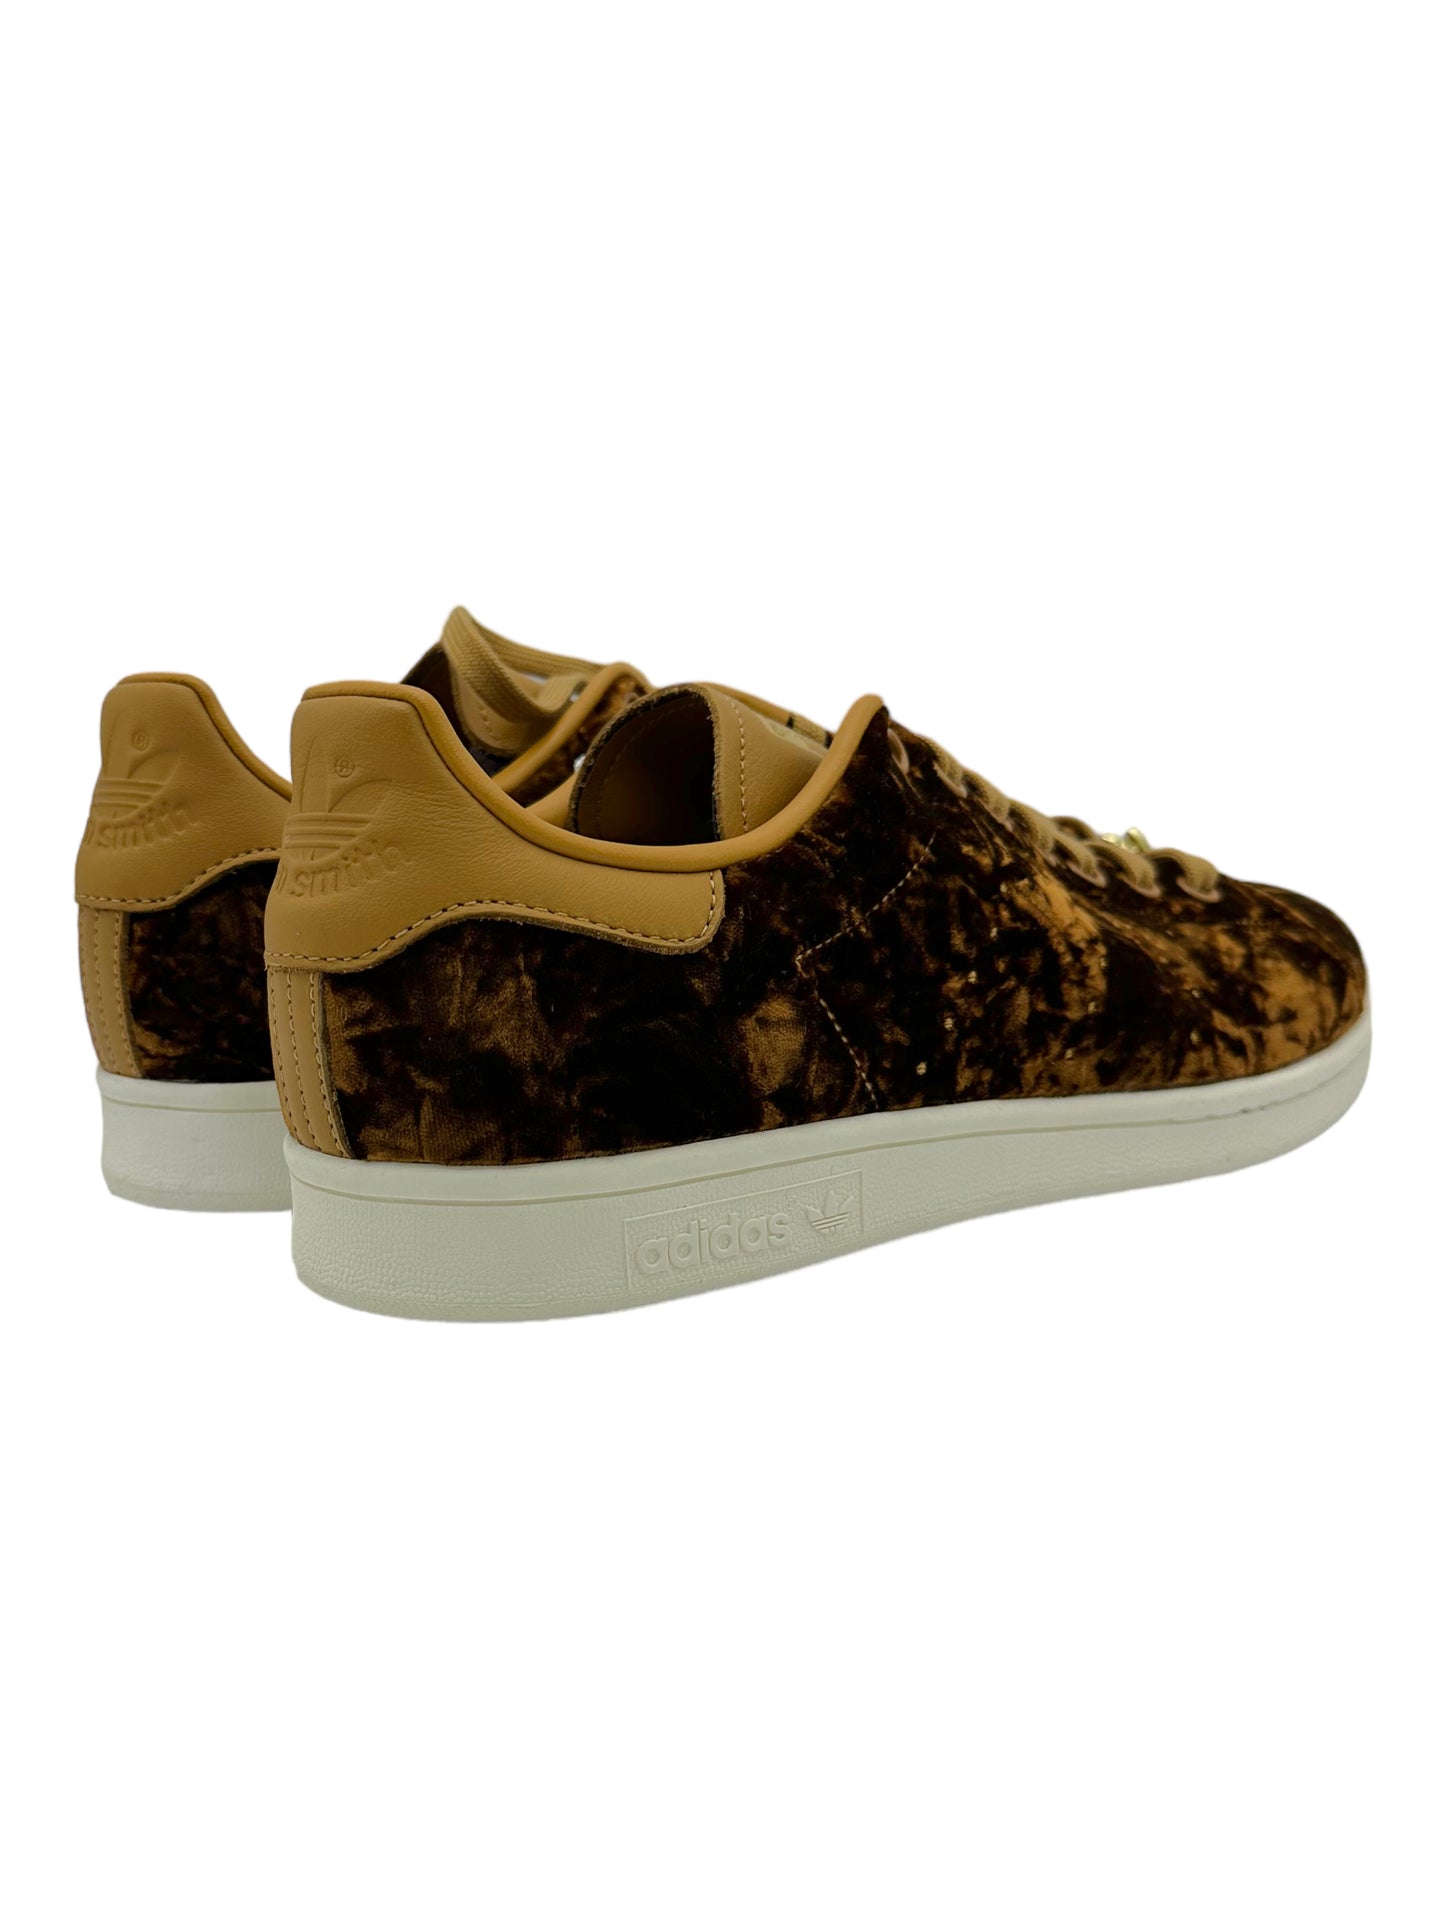 Adidas Stan Smith Mesa Velvet Pack Sneakers - Genuine Design Luxury Consignment for Men. New & Pre-Owned Clothing, Shoes, & Accessories. Calgary, Canada